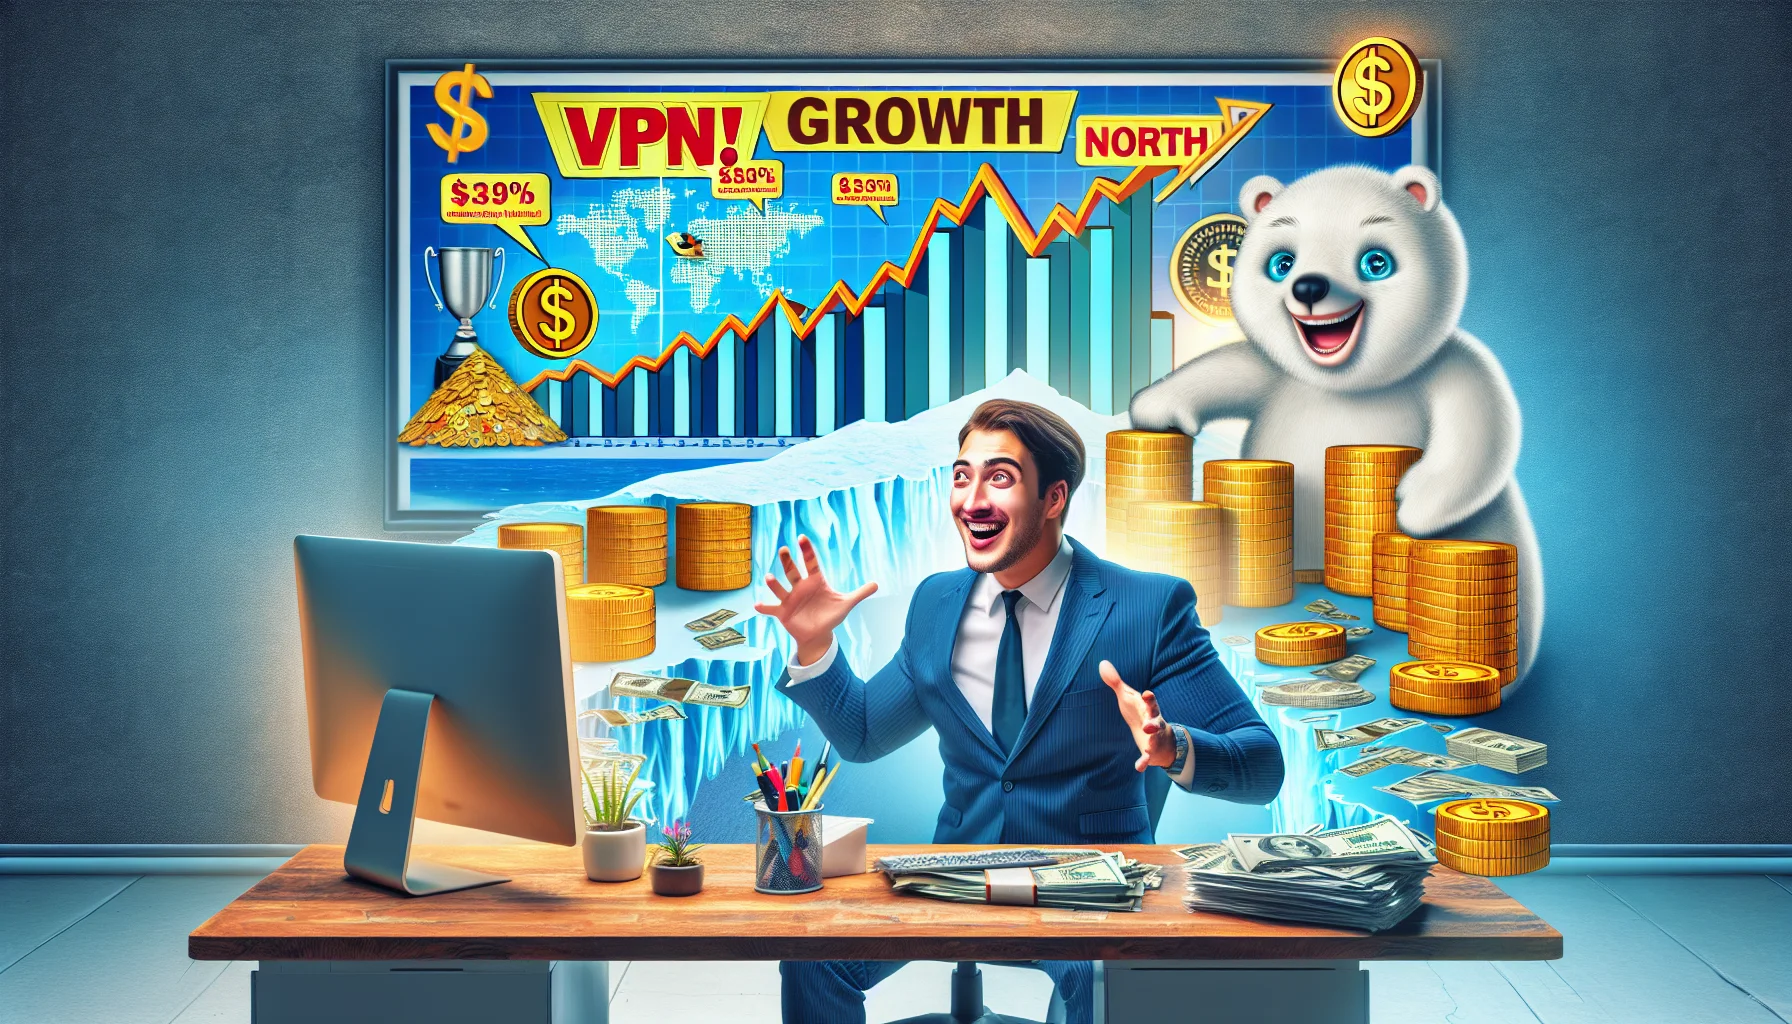 Imagine a humorous image set within a realistic scene of an online business environment. In the center, a cheerful and smartly dressed Caucasian male entrepreneur is looking excitedly at his computer screen, which displays an impressive growth chart. He sits in a modern, well-lit home office, surrounded by elements that symbolize monetary success - stacks of virtual coins, a digital piggy bank, a golden keyboard, etc. The office wall behind him features a big, brightly colored poster advertising VPN services with the impression of being situated in the North, like an iceberg or polar bear on it, adding a touch of surreal humor. Note - this image does not represent any specific brand, but merely illustrates a common online business scenario.